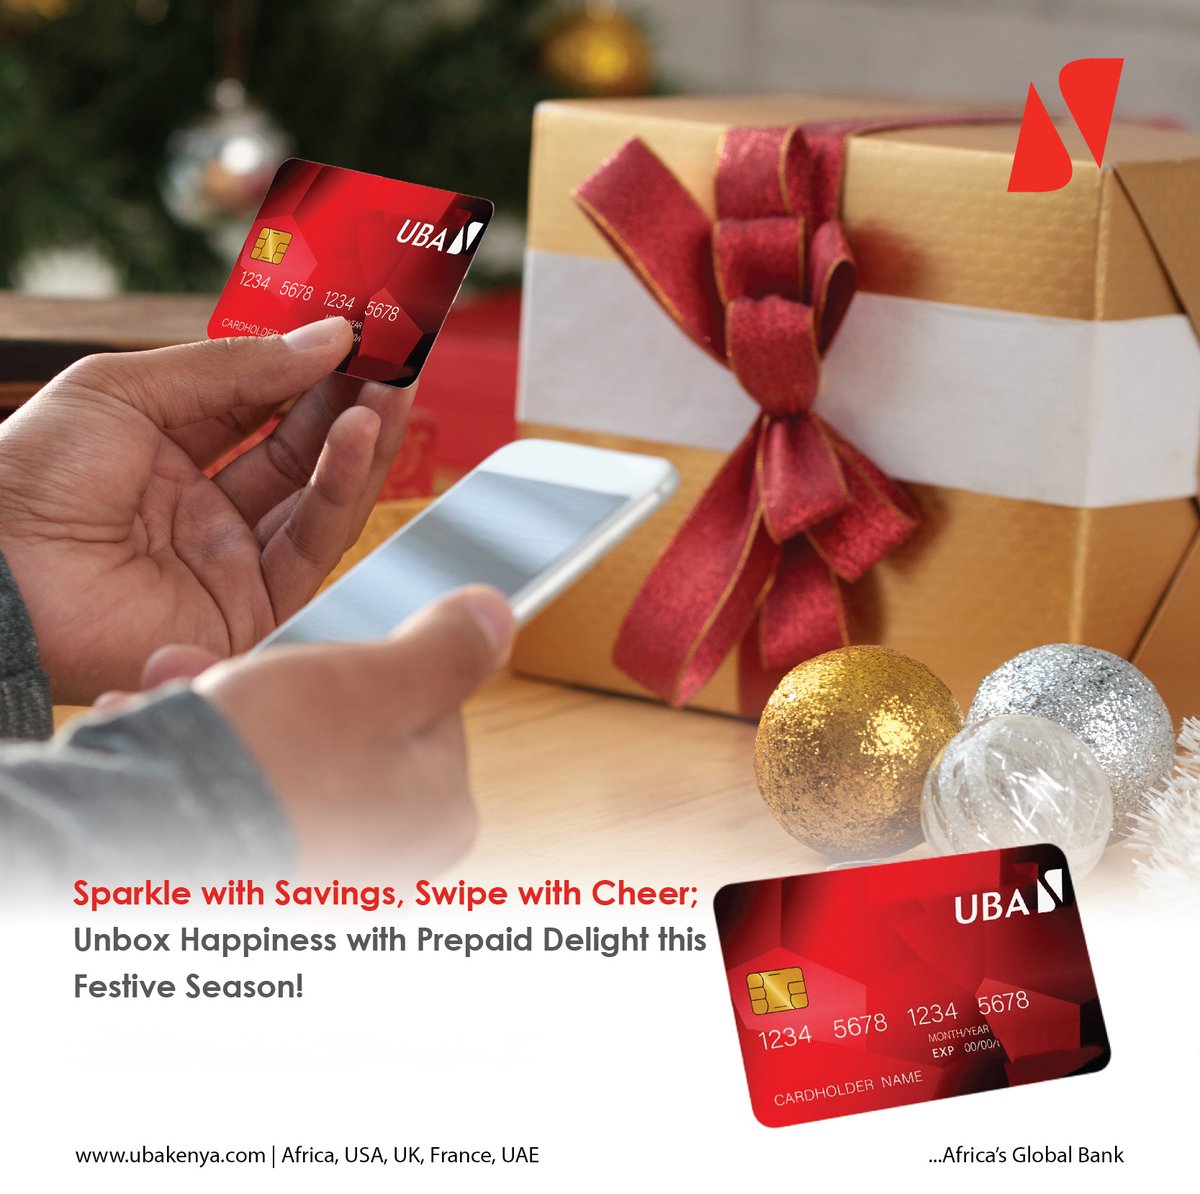 Unwrap joy this season! 🎁✨ Surprise your loved ones with the gift of choice – a prepaid card that lets them shine bright this holiday season! 💖
#GiftOfChoice
#HolidaySparkle
#UBAKenya
#africasglobalbank